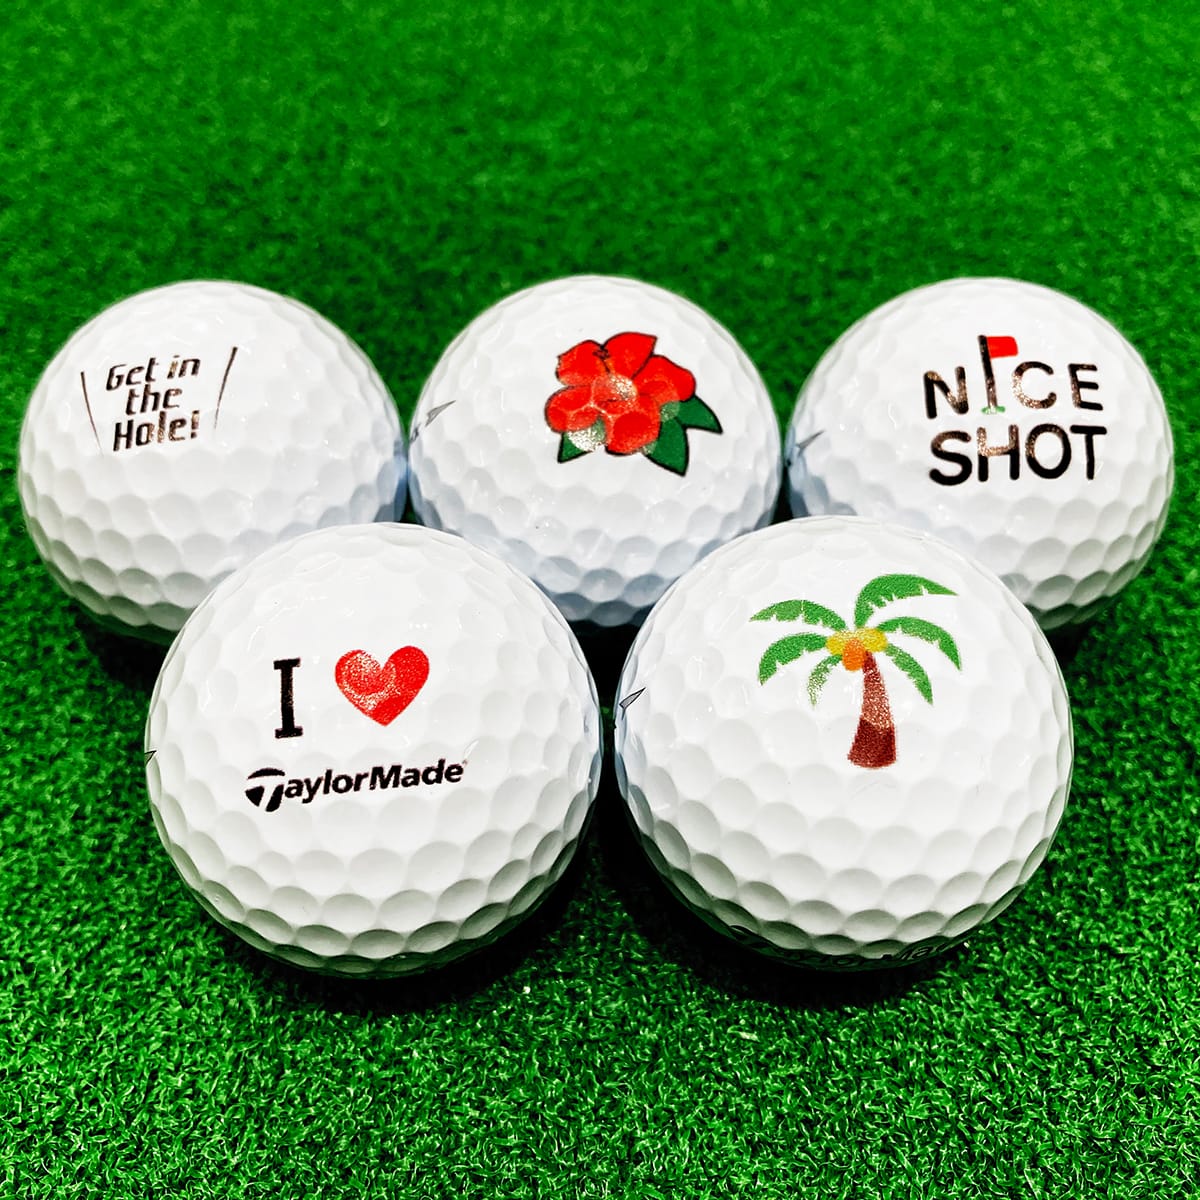 Taylormade Golf Balls All Current Models Own Name Ball